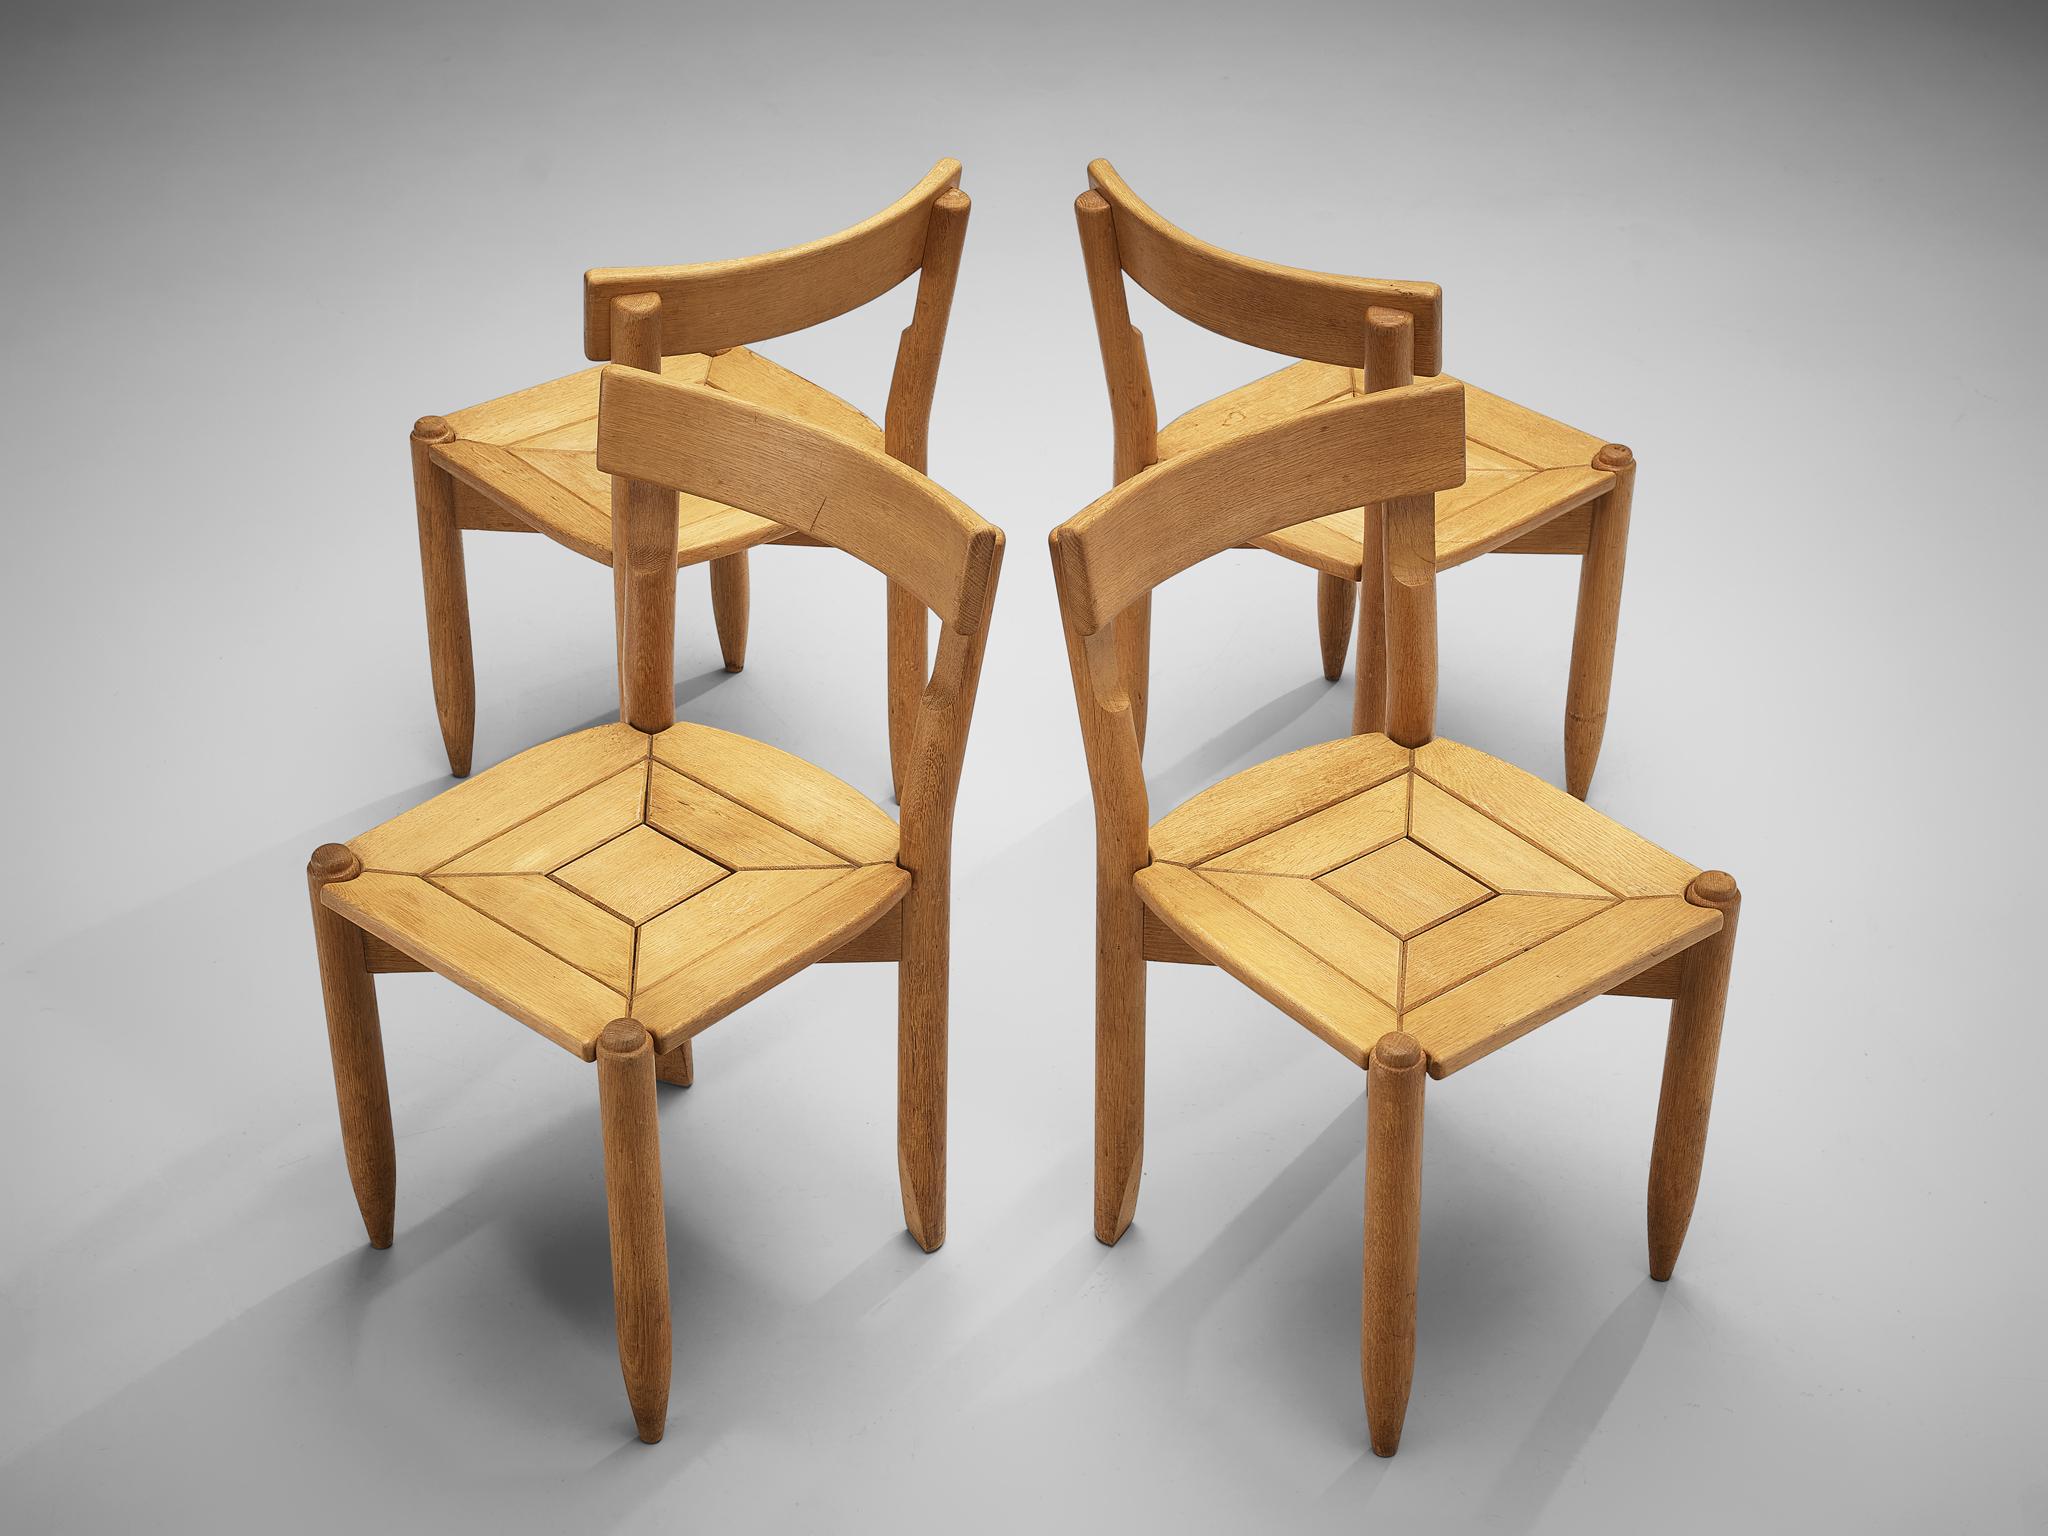 Guillerme & Chambron for Votre Maison, set of four dining chairs model ‘Trèfle’, solid oak, France, 1960s

The ‘Trèfle’ (French for clover) dining chairs by Guillerme & Chambron feature a decorative seat. A square in the center is flanked by two